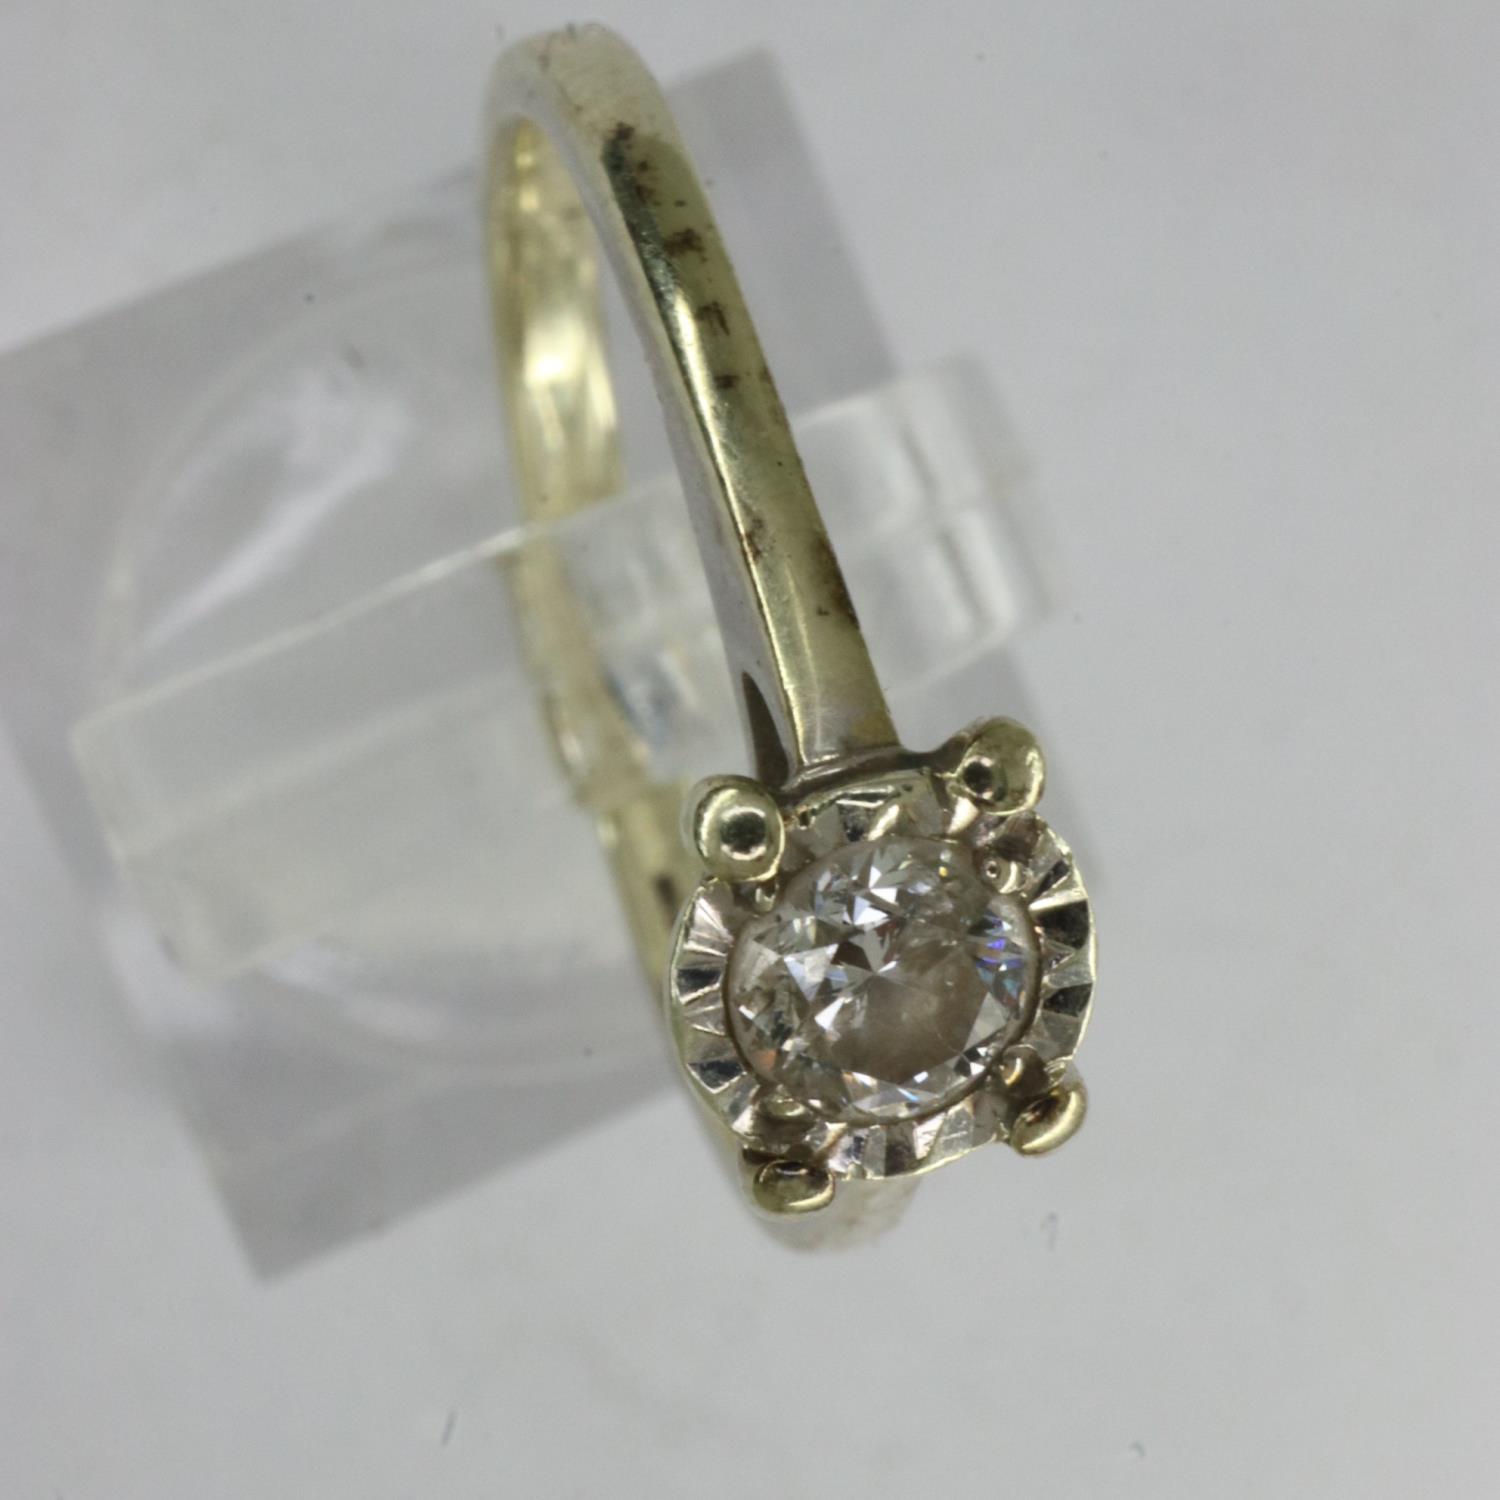 9ct gold diamond set solitaire ring, size K, 1.7g. UK P&P Group 0 (£6+VAT for the first lot and £1+